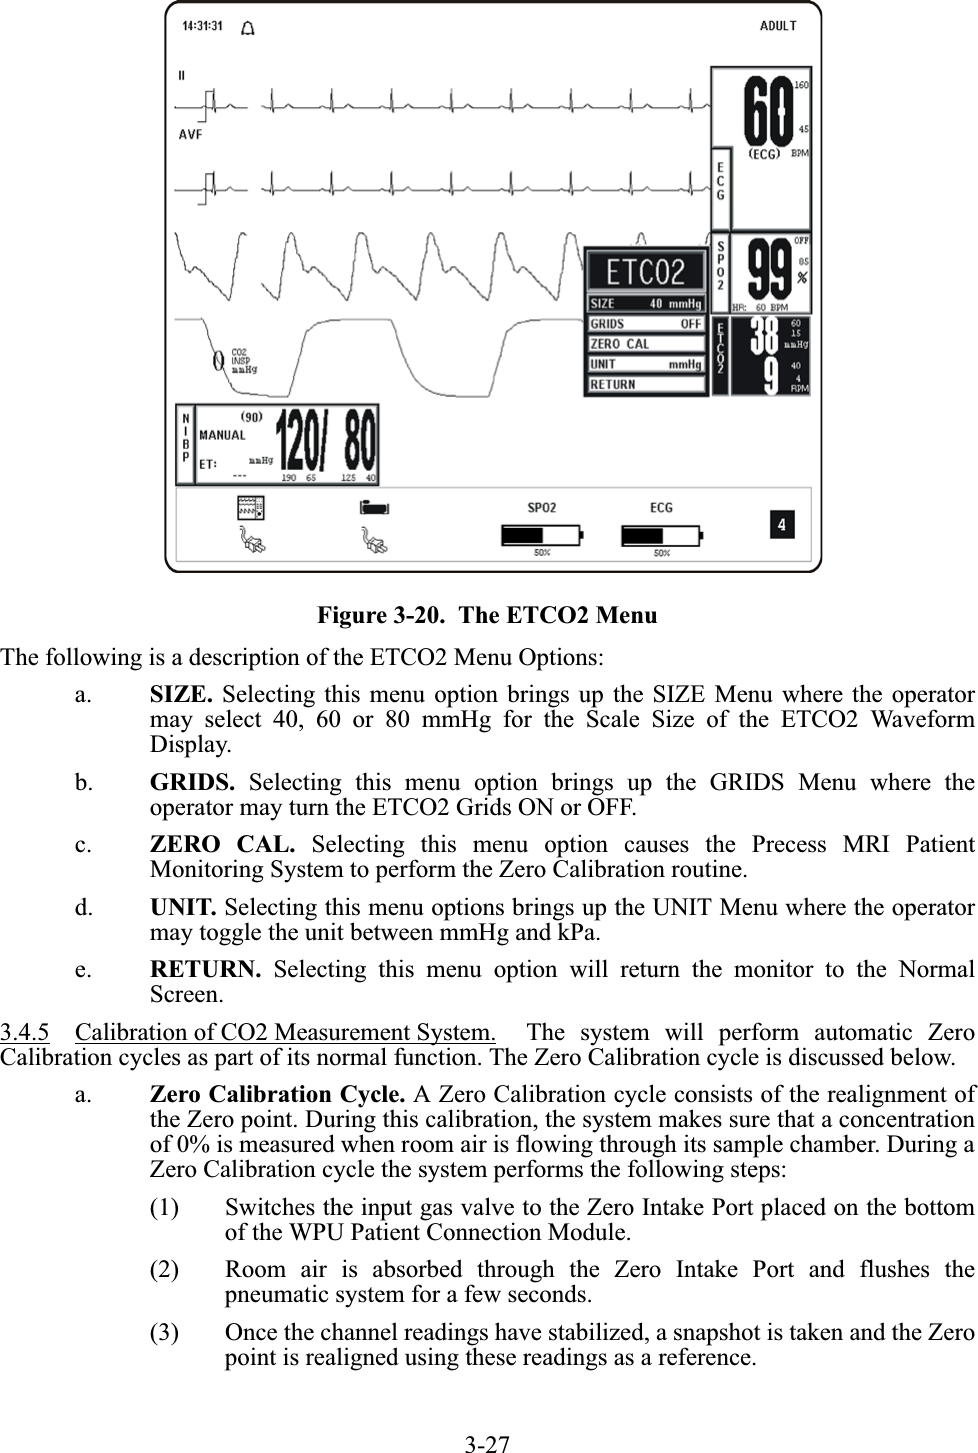 3-27Figure 3-20.  The ETCO2 MenuThe following is a description of the ETCO2 Menu Options:a. SIZE. Selecting this menu option brings up the SIZE Menu where the operatormay select 40, 60 or 80 mmHg for the Scale Size of the ETCO2 WaveformDisplay.b. GRIDS. Selecting this menu option brings up the GRIDS Menu where theoperator may turn the ETCO2 Grids ON or OFF.c. ZERO CAL. Selecting this menu option causes the Precess MRI PatientMonitoring System to perform the Zero Calibration routine.d. UNIT. Selecting this menu options brings up the UNIT Menu where the operatormay toggle the unit between mmHg and kPa.e. RETURN. Selecting this menu option will return the monitor to the NormalScreen.3.4.5 Calibration of CO2 Measurement System.  The system will perform automatic ZeroCalibration cycles as part of its normal function. The Zero Calibration cycle is discussed below.a. Zero Calibration Cycle. A Zero Calibration cycle consists of the realignment ofthe Zero point. During this calibration, the system makes sure that a concentrationof 0% is measured when room air is flowing through its sample chamber. During aZero Calibration cycle the system performs the following steps:(1) Switches the input gas valve to the Zero Intake Port placed on the bottomof the WPU Patient Connection Module.(2) Room air is absorbed through the Zero Intake Port and flushes thepneumatic system for a few seconds.(3) Once the channel readings have stabilized, a snapshot is taken and the Zeropoint is realigned using these readings as a reference.